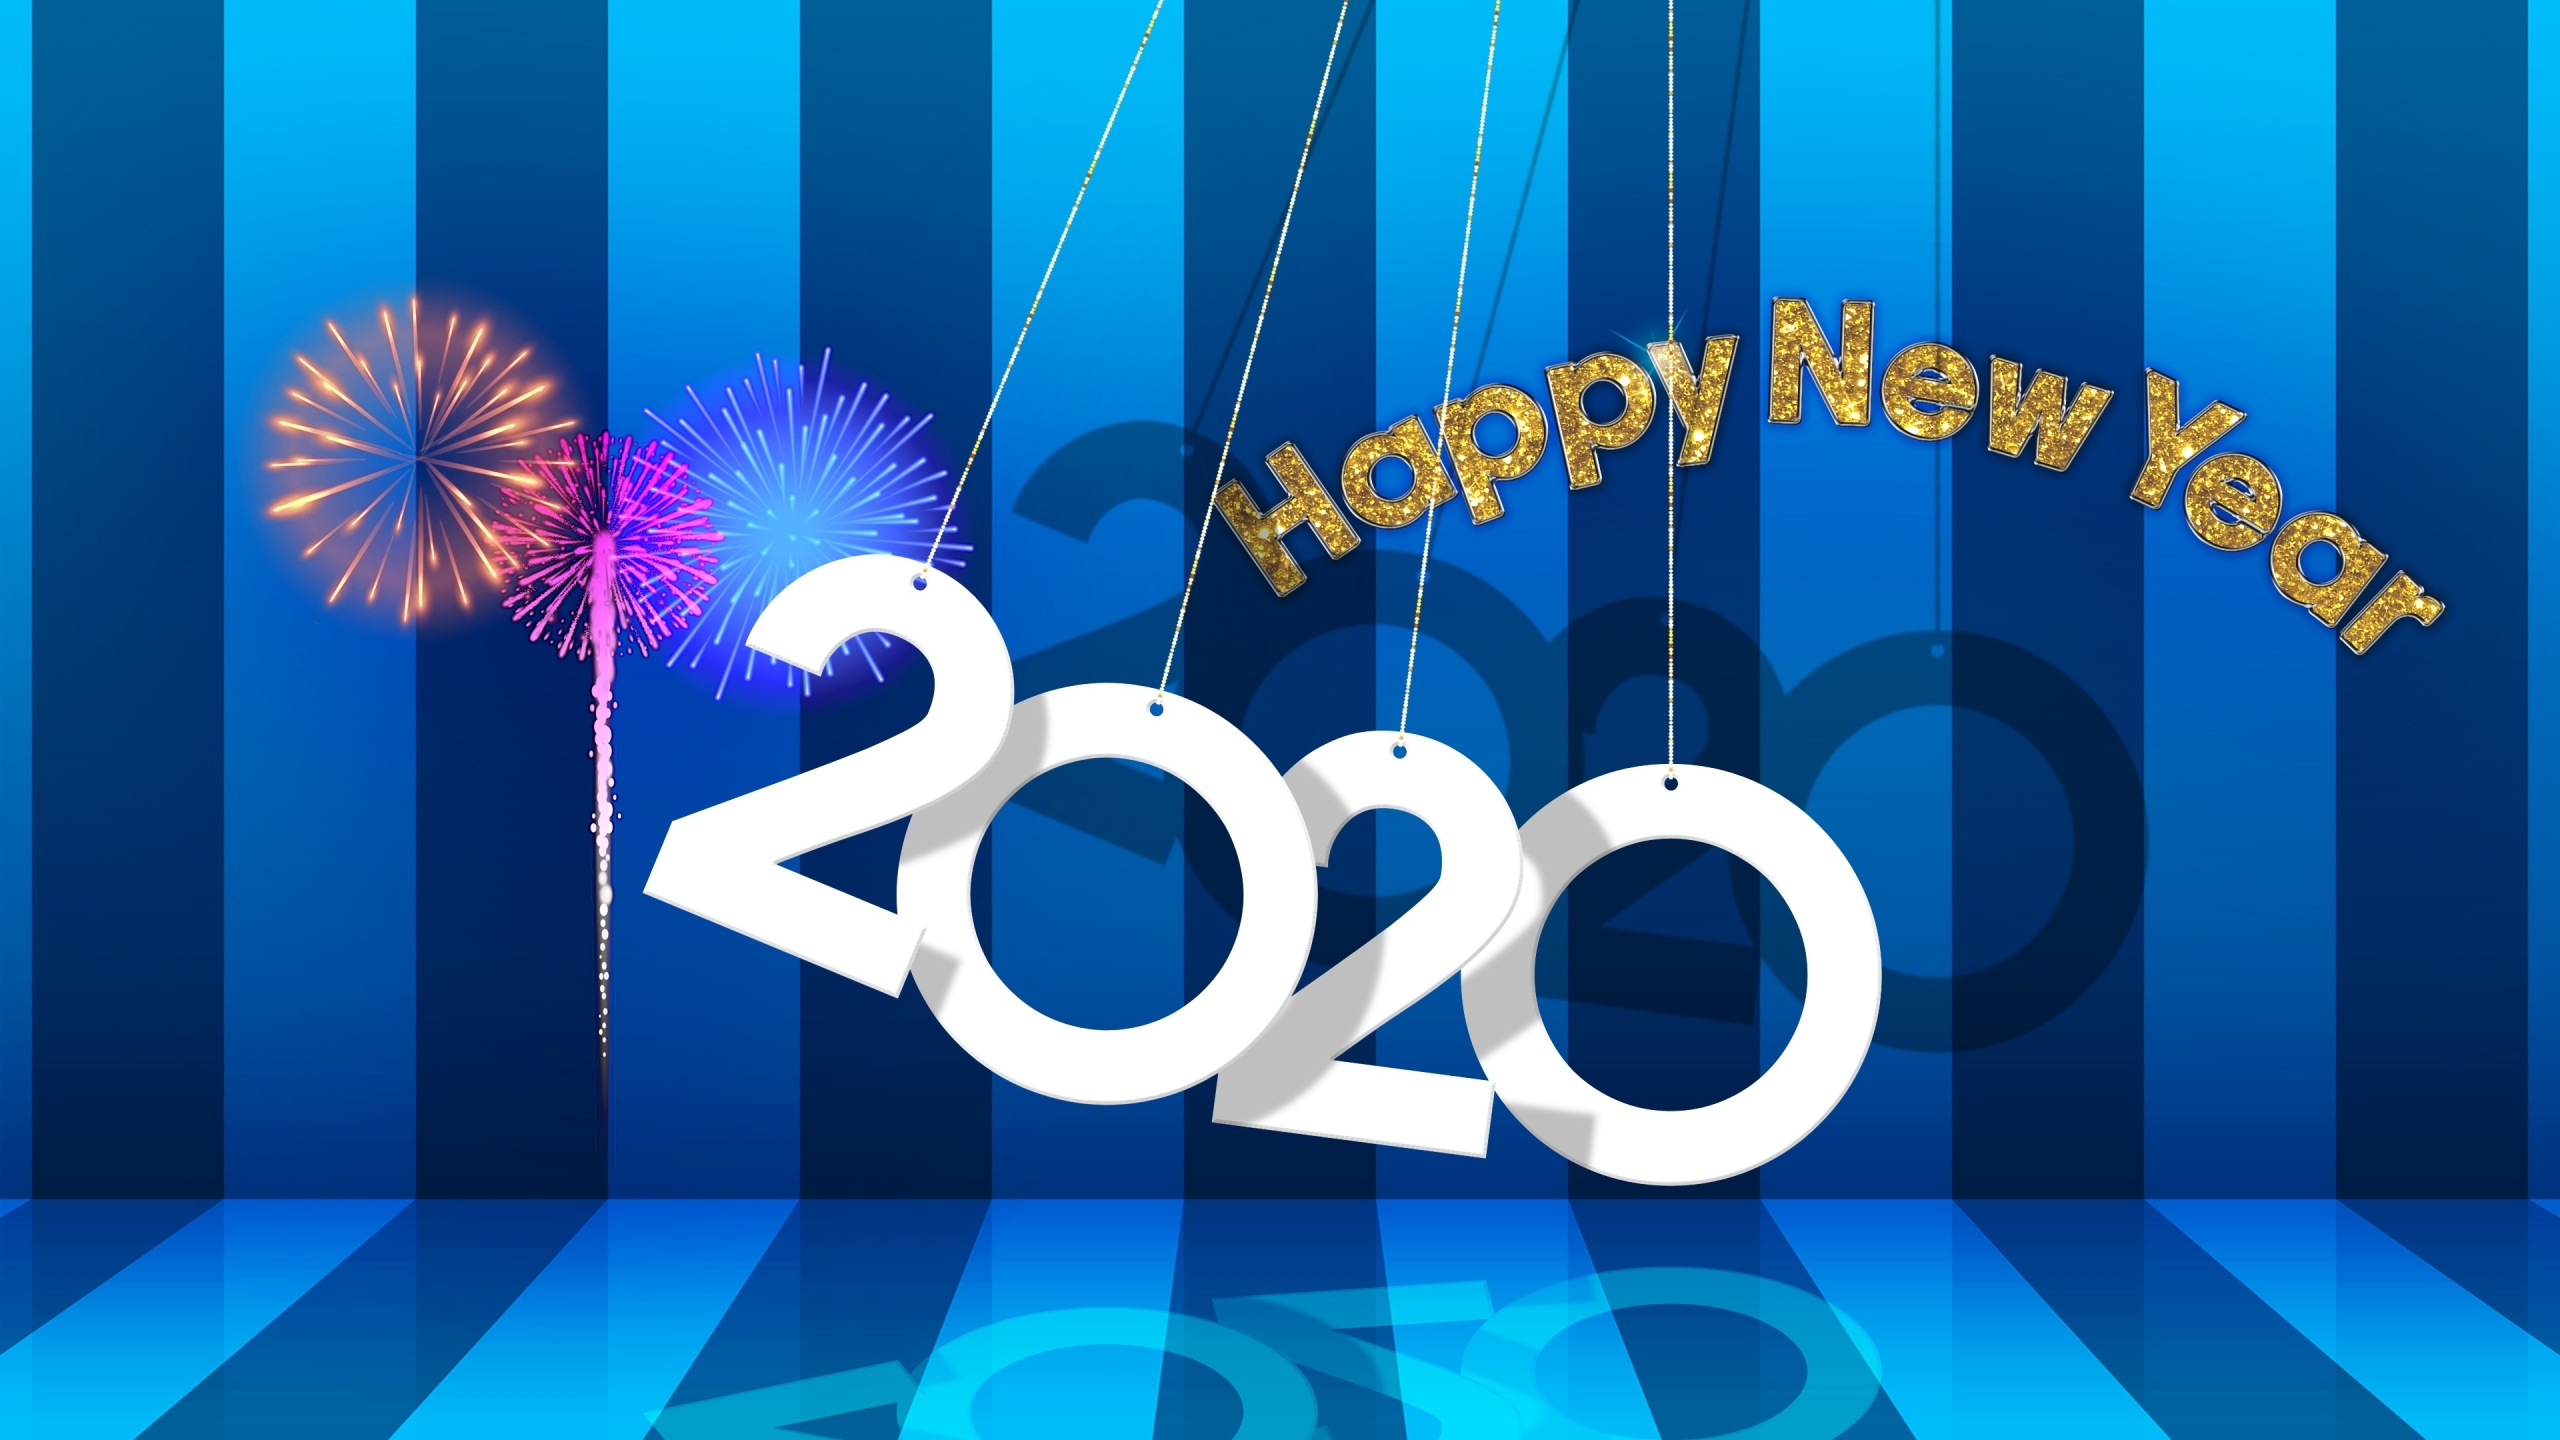 2560x1440 New Year 2020 1440p Resolution Wallpaper Hd Other 4k